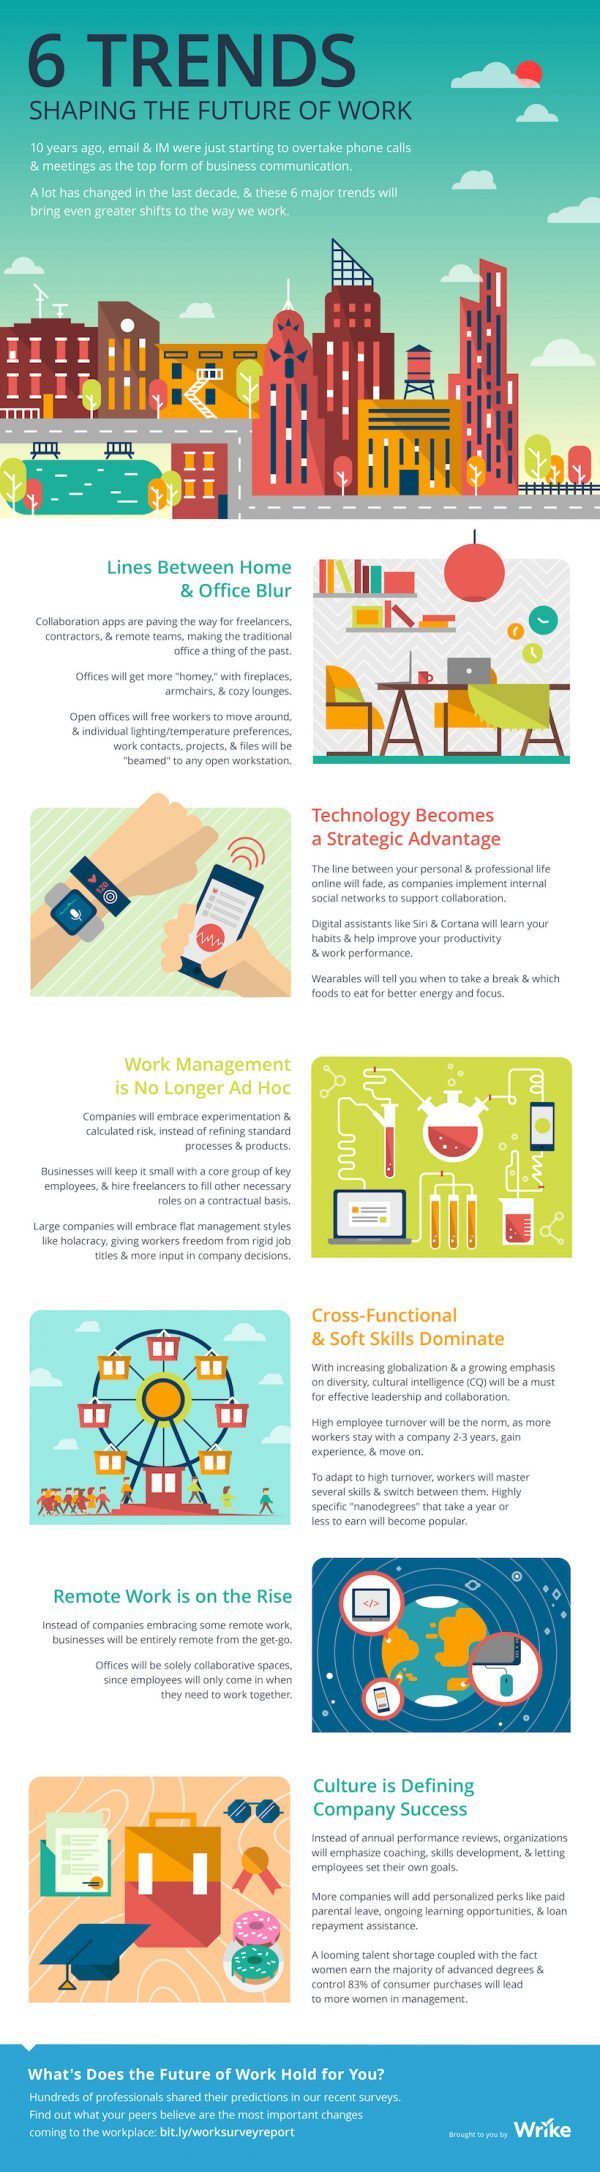 6 trends shaping the future of work